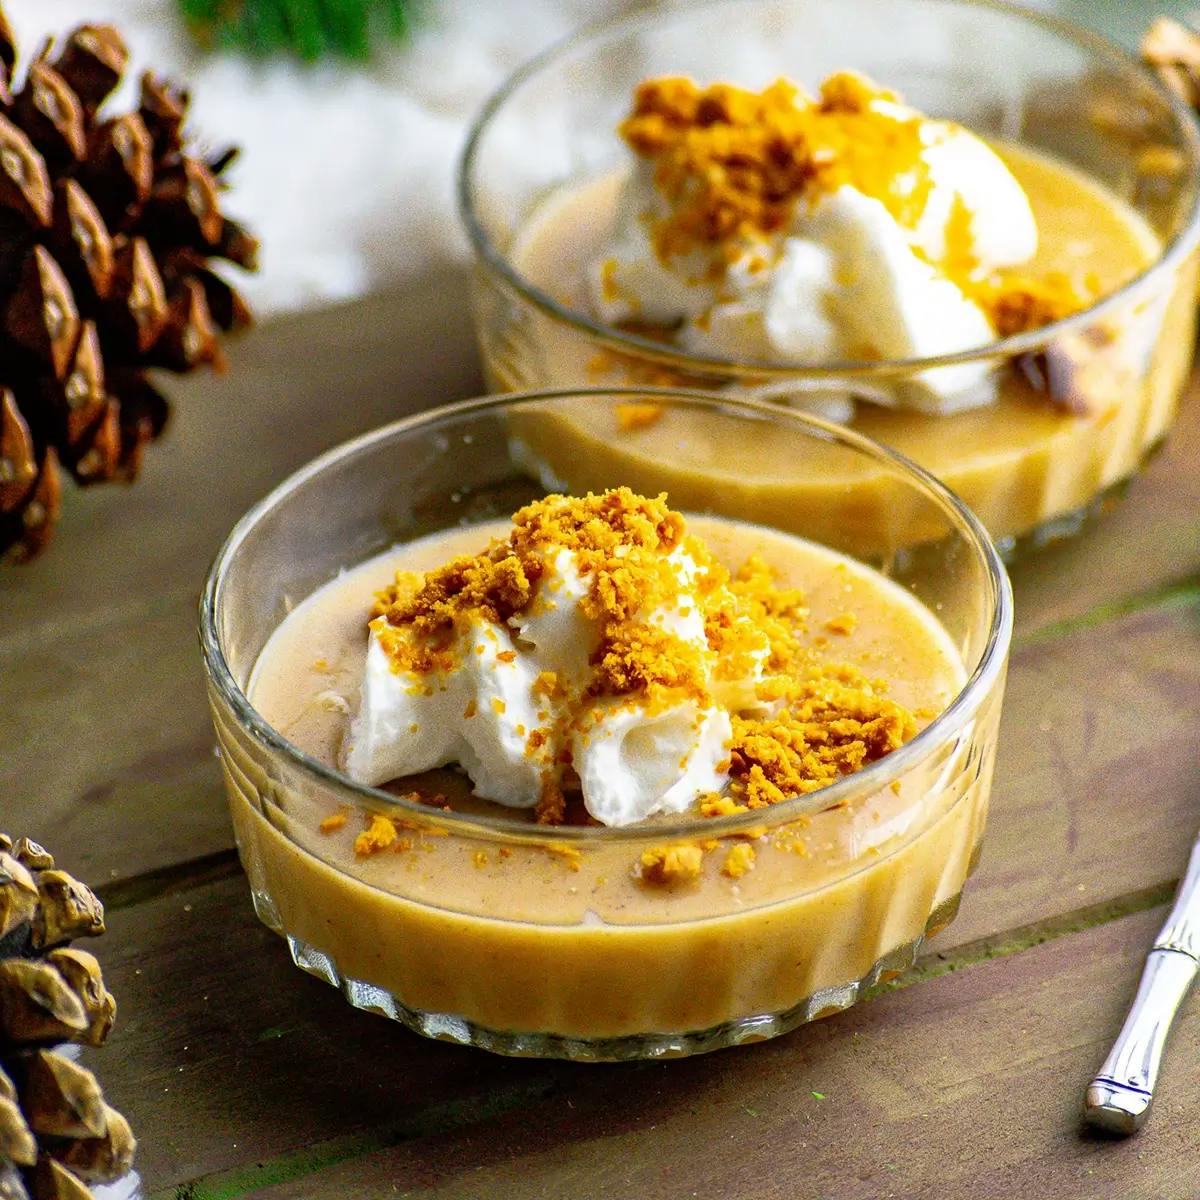 Homemade vegan vanilla pudding recipe in glass bowl, topped with crushed gingerbread and whipped cream.